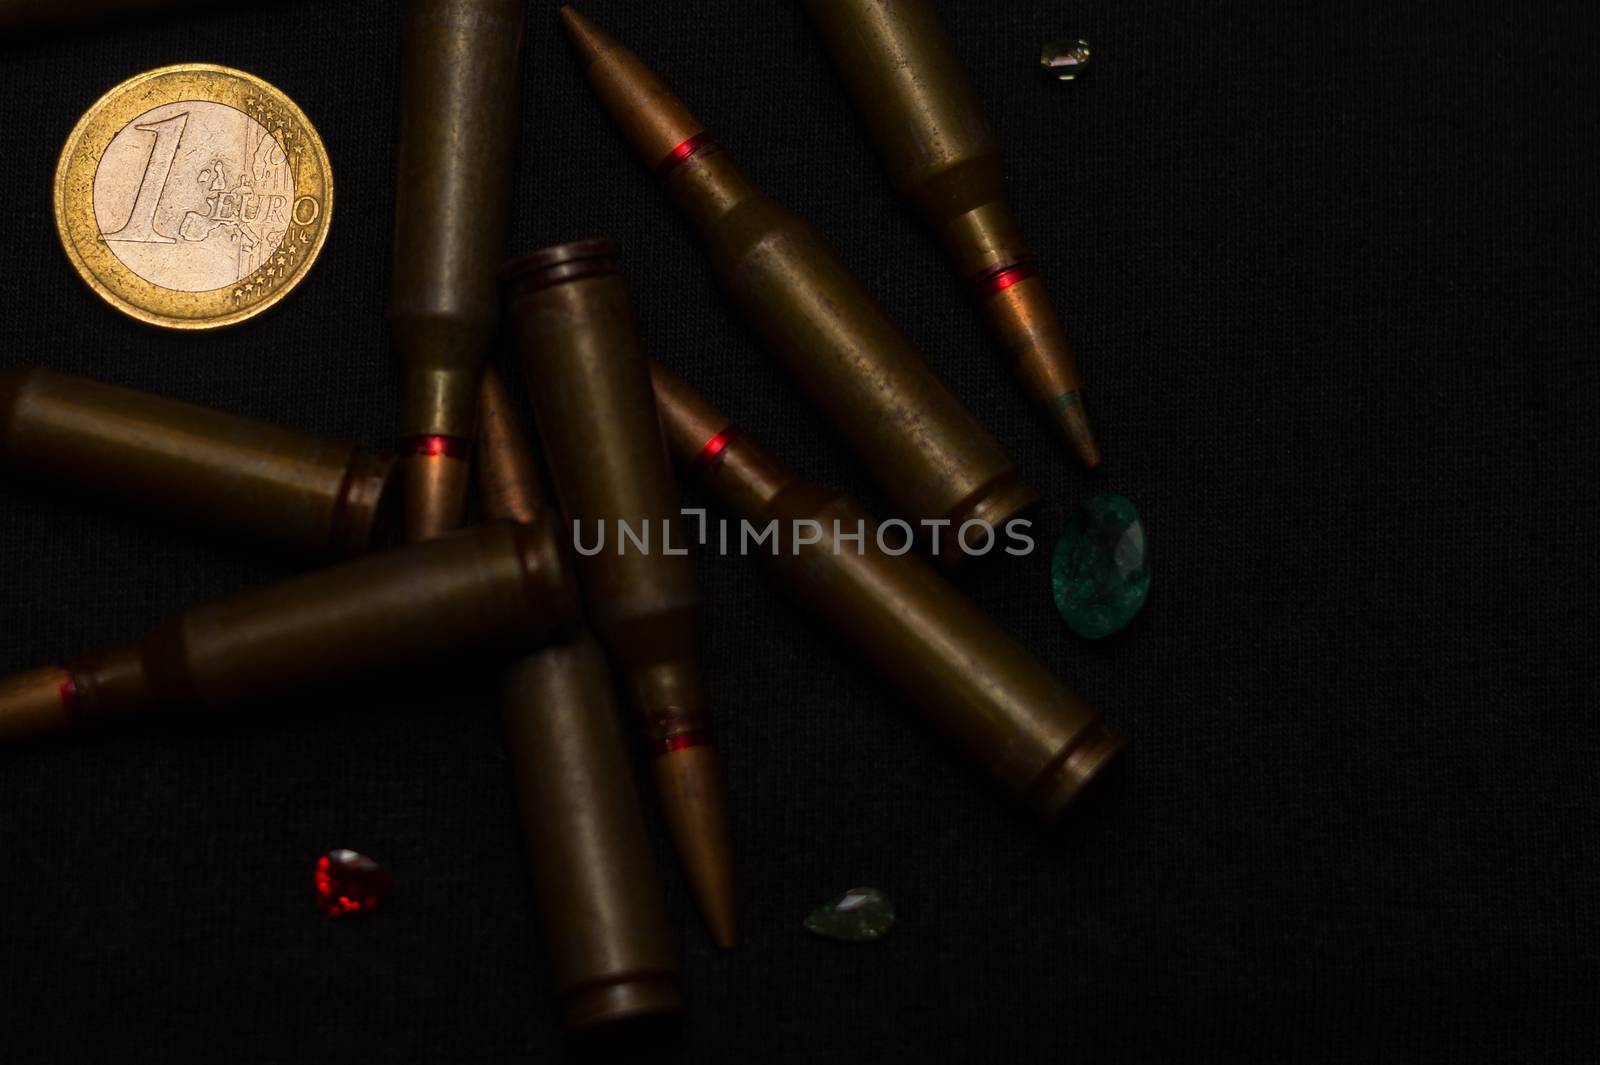 Rifle ammo around one euro coin wigh gemstones on black background. Symbolizes the war for money and one of the world's problems. by alexsdriver